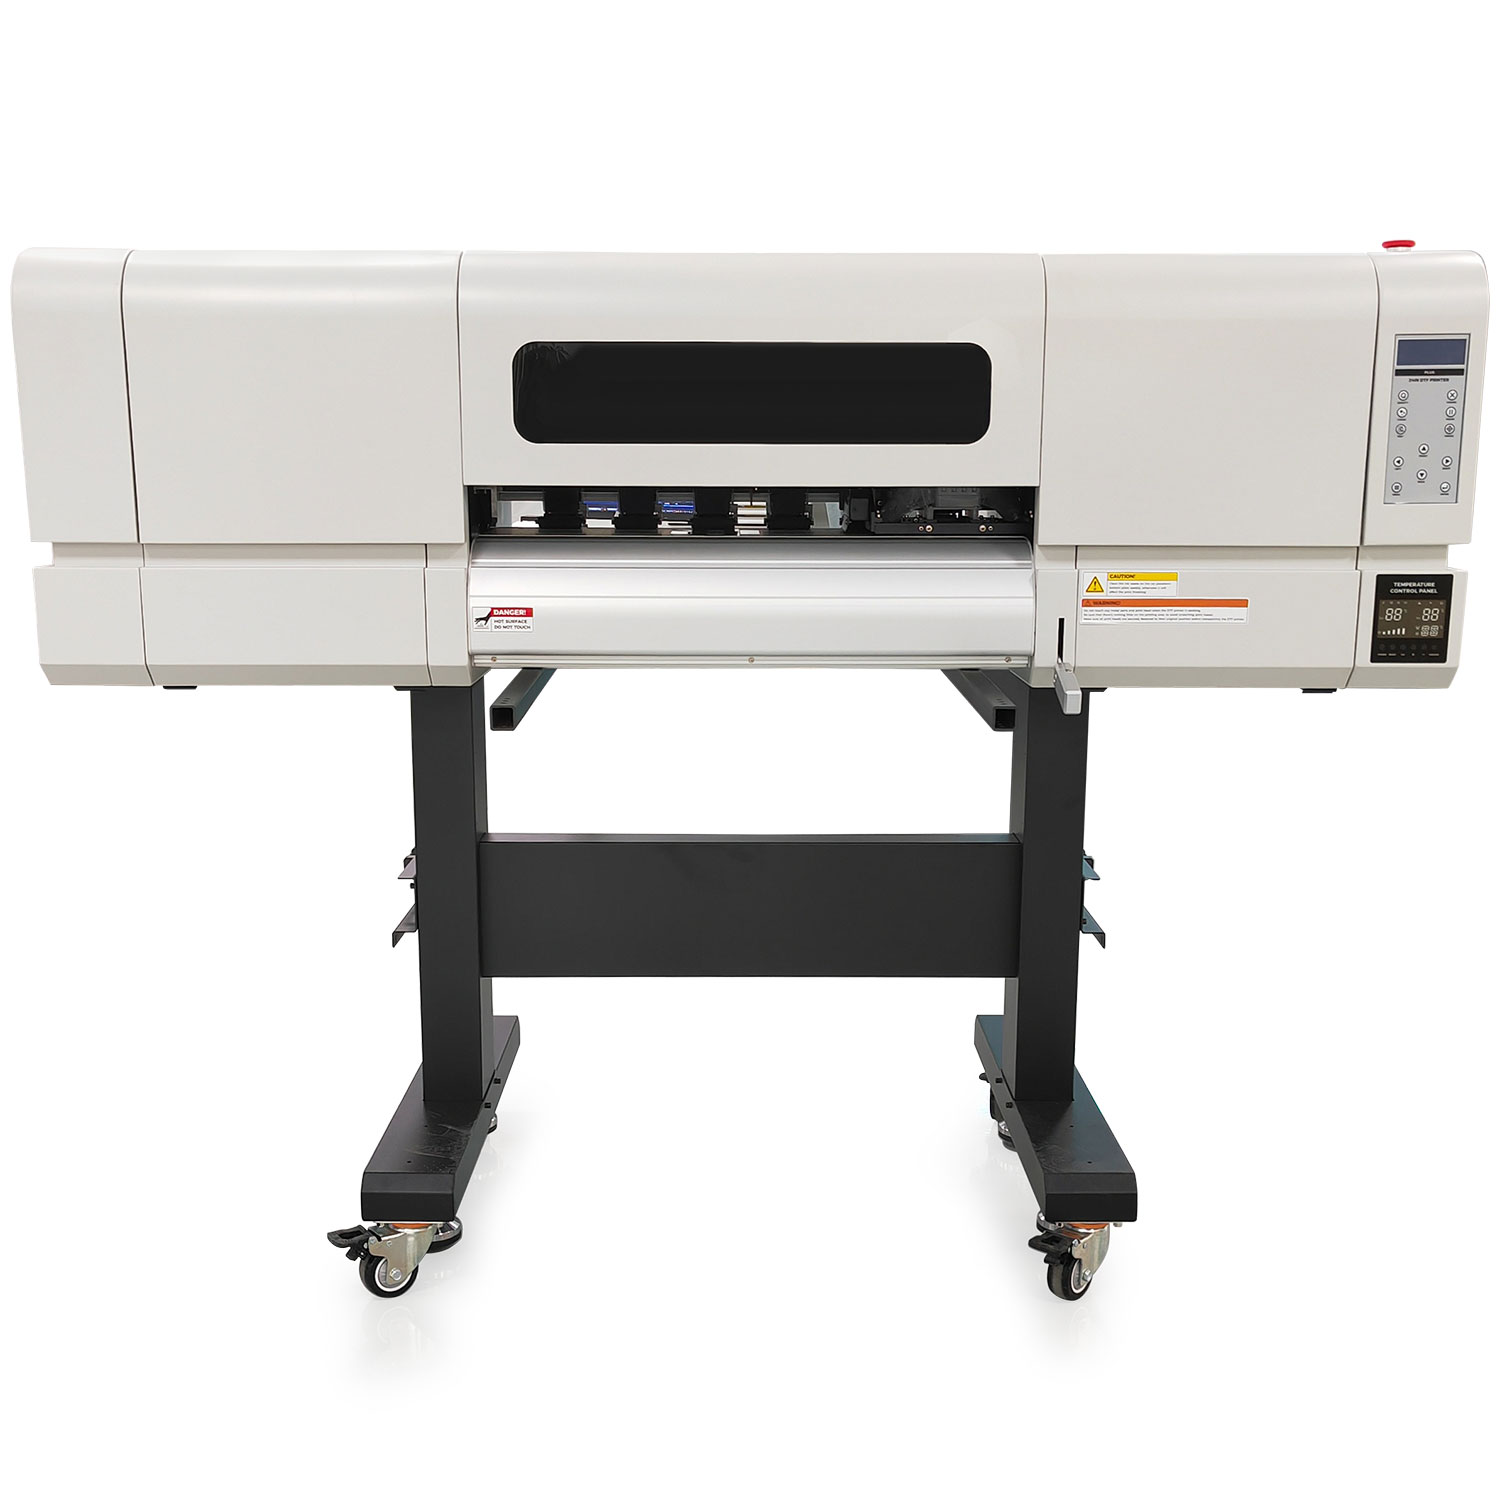 CALCA Ultra IV 24inch (600mm) DTF Printer (Direct to Film Printer) with 4 Epson I3200-A1 Printheads